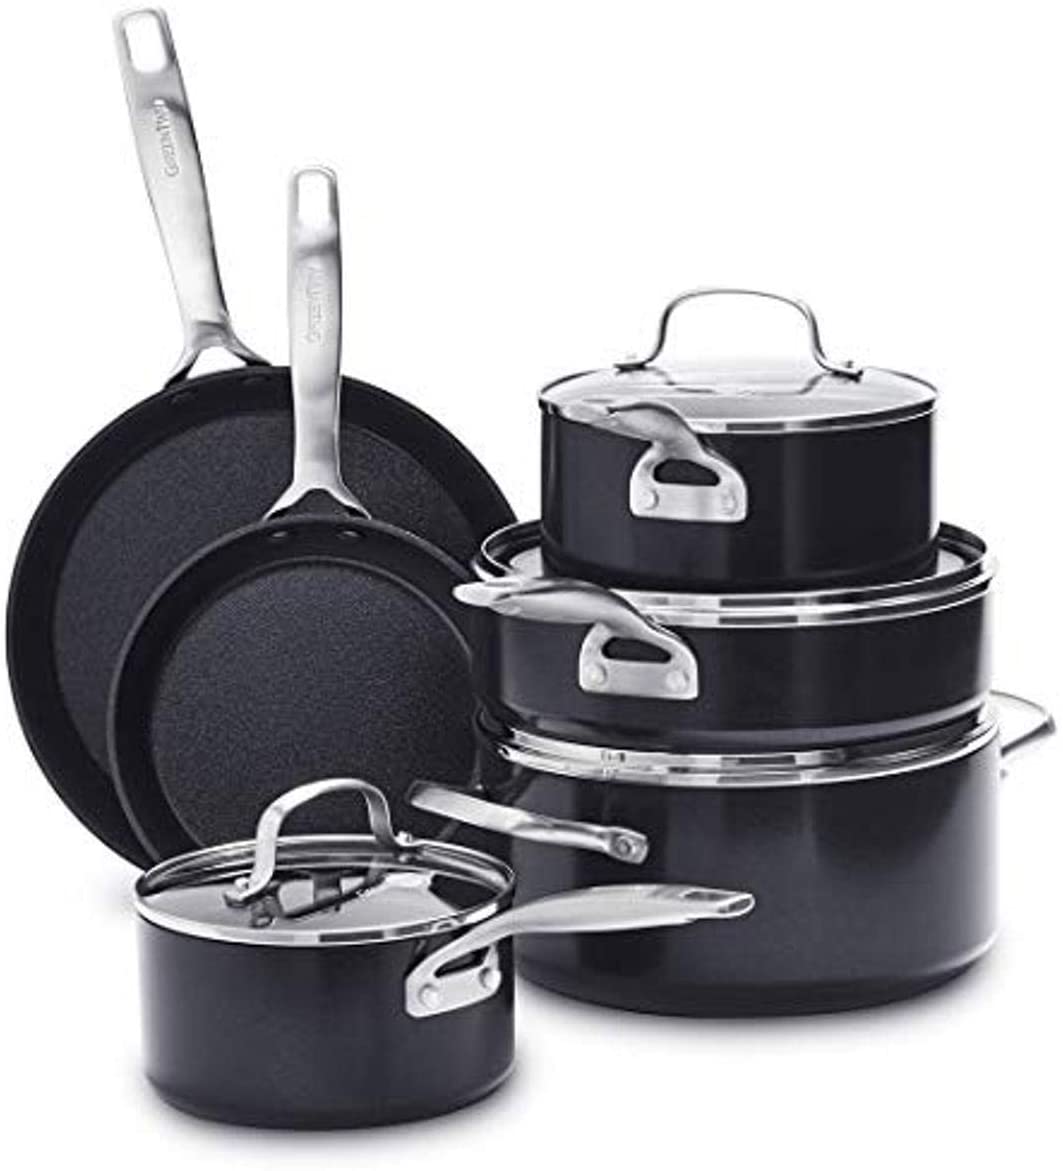 The best Ceramic Nonstick Cookware Reviews